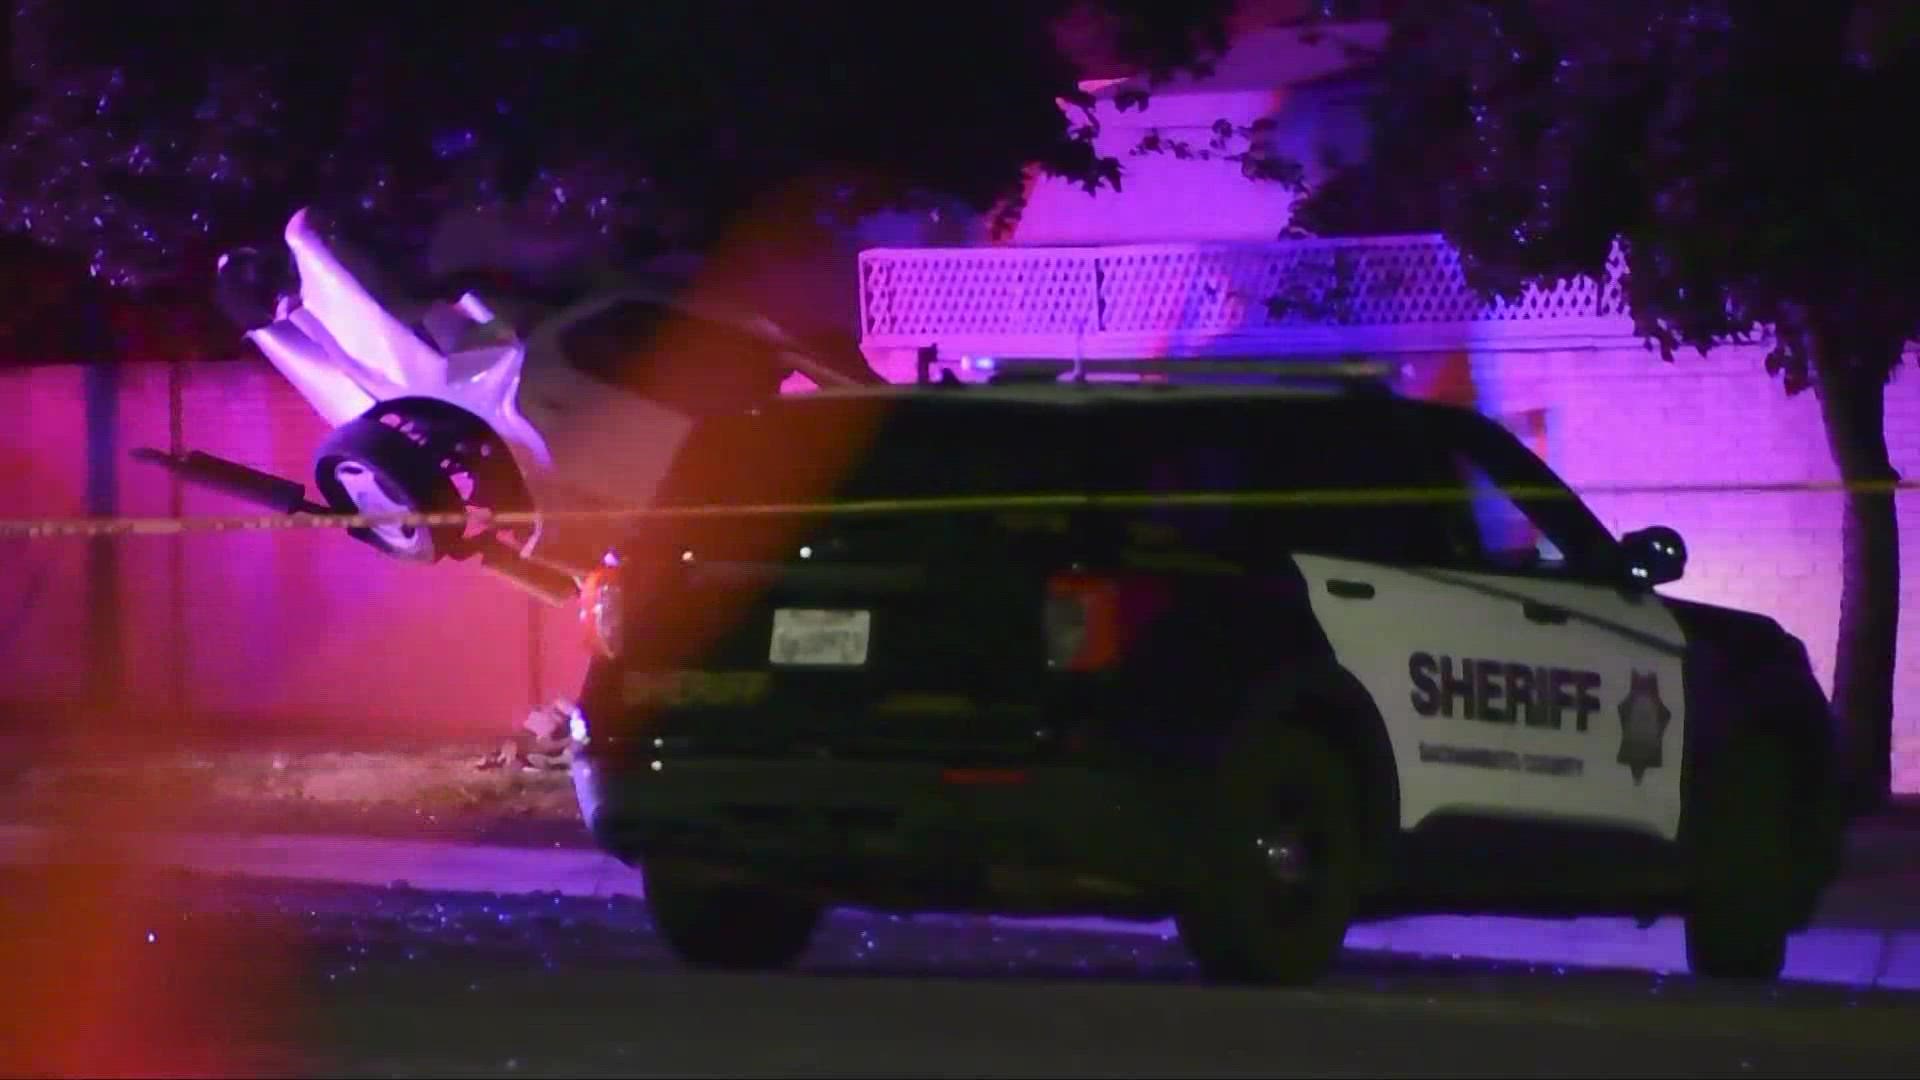 The police chase started near 65th Street and 14th Avenue in Sacramento Friday night, authorities say.